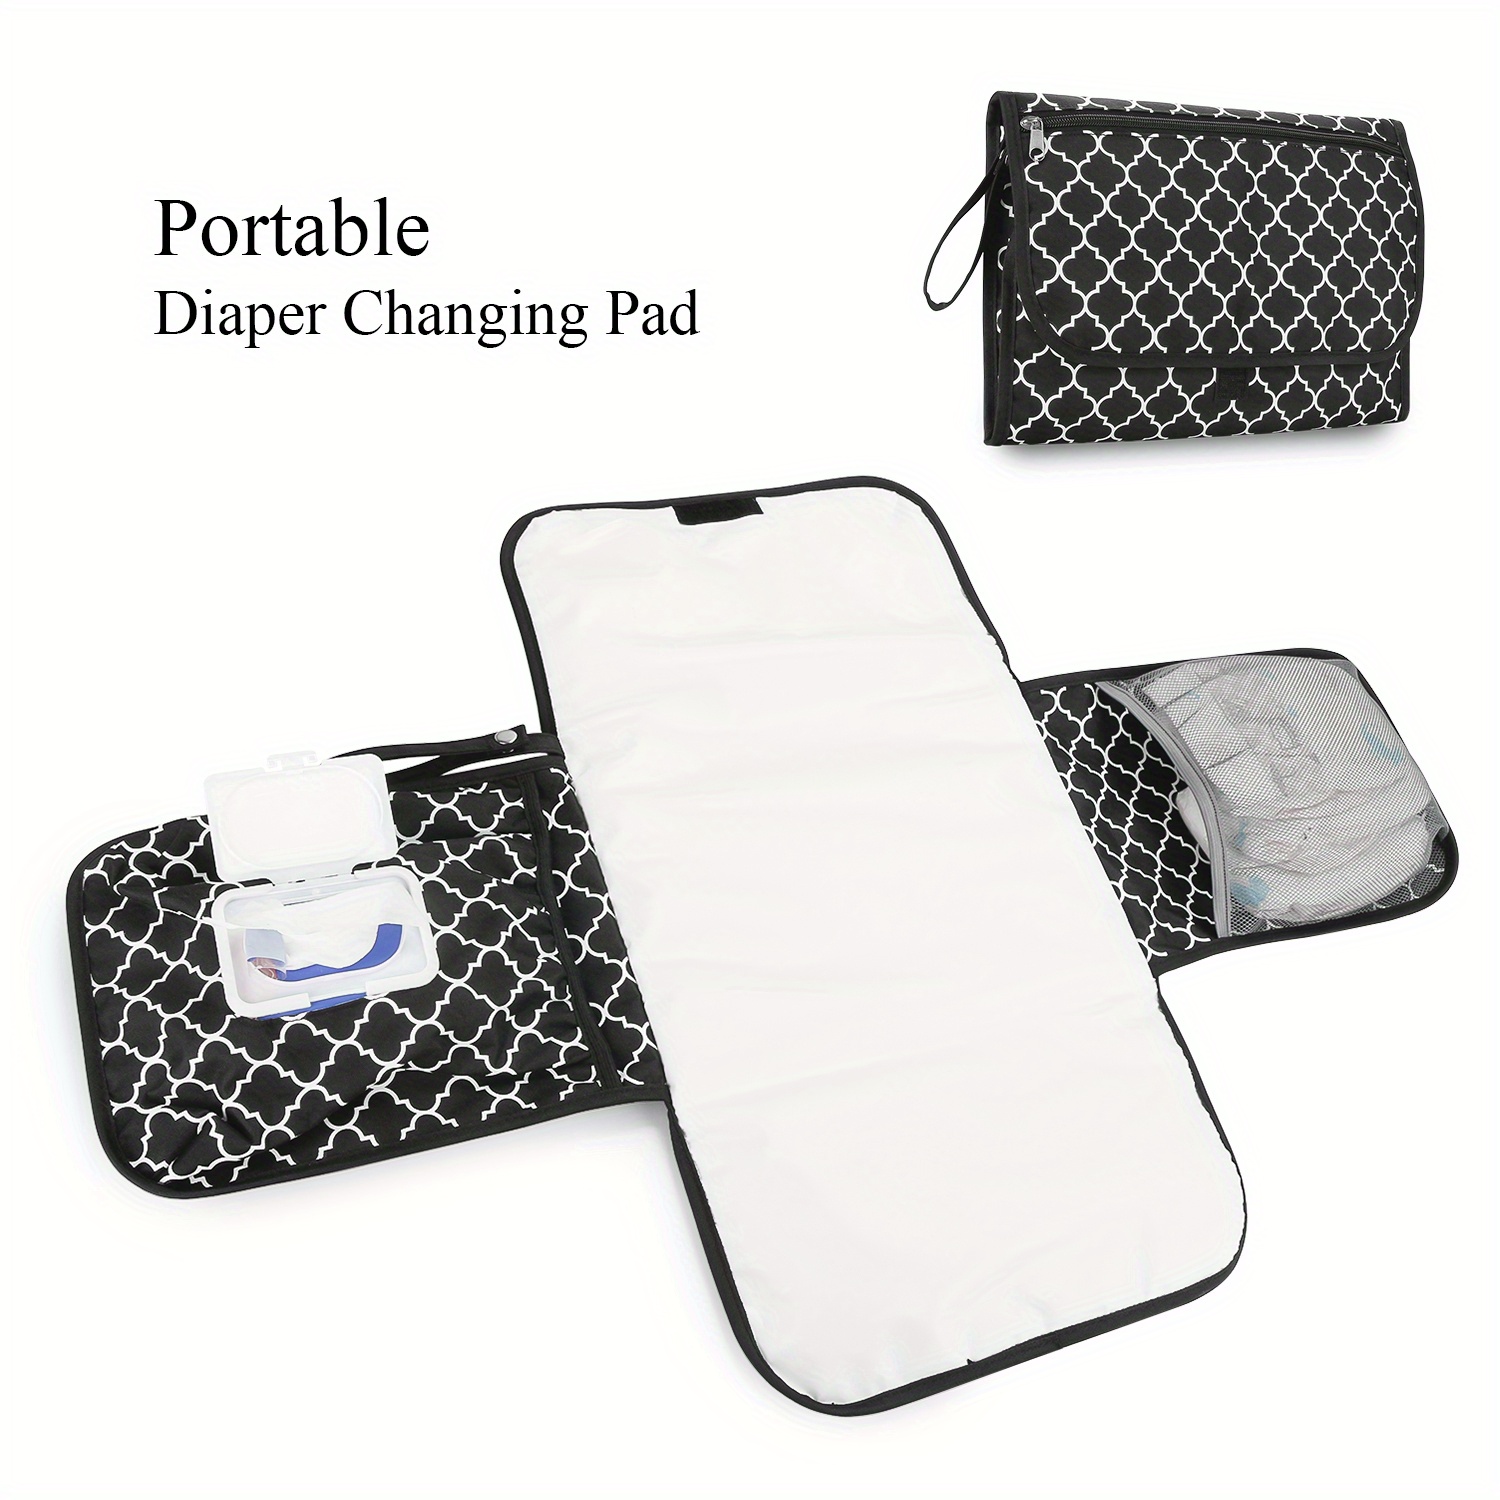 BÉIS 'The Changing Organizer' in Black - Portable Diaper Changing Pad